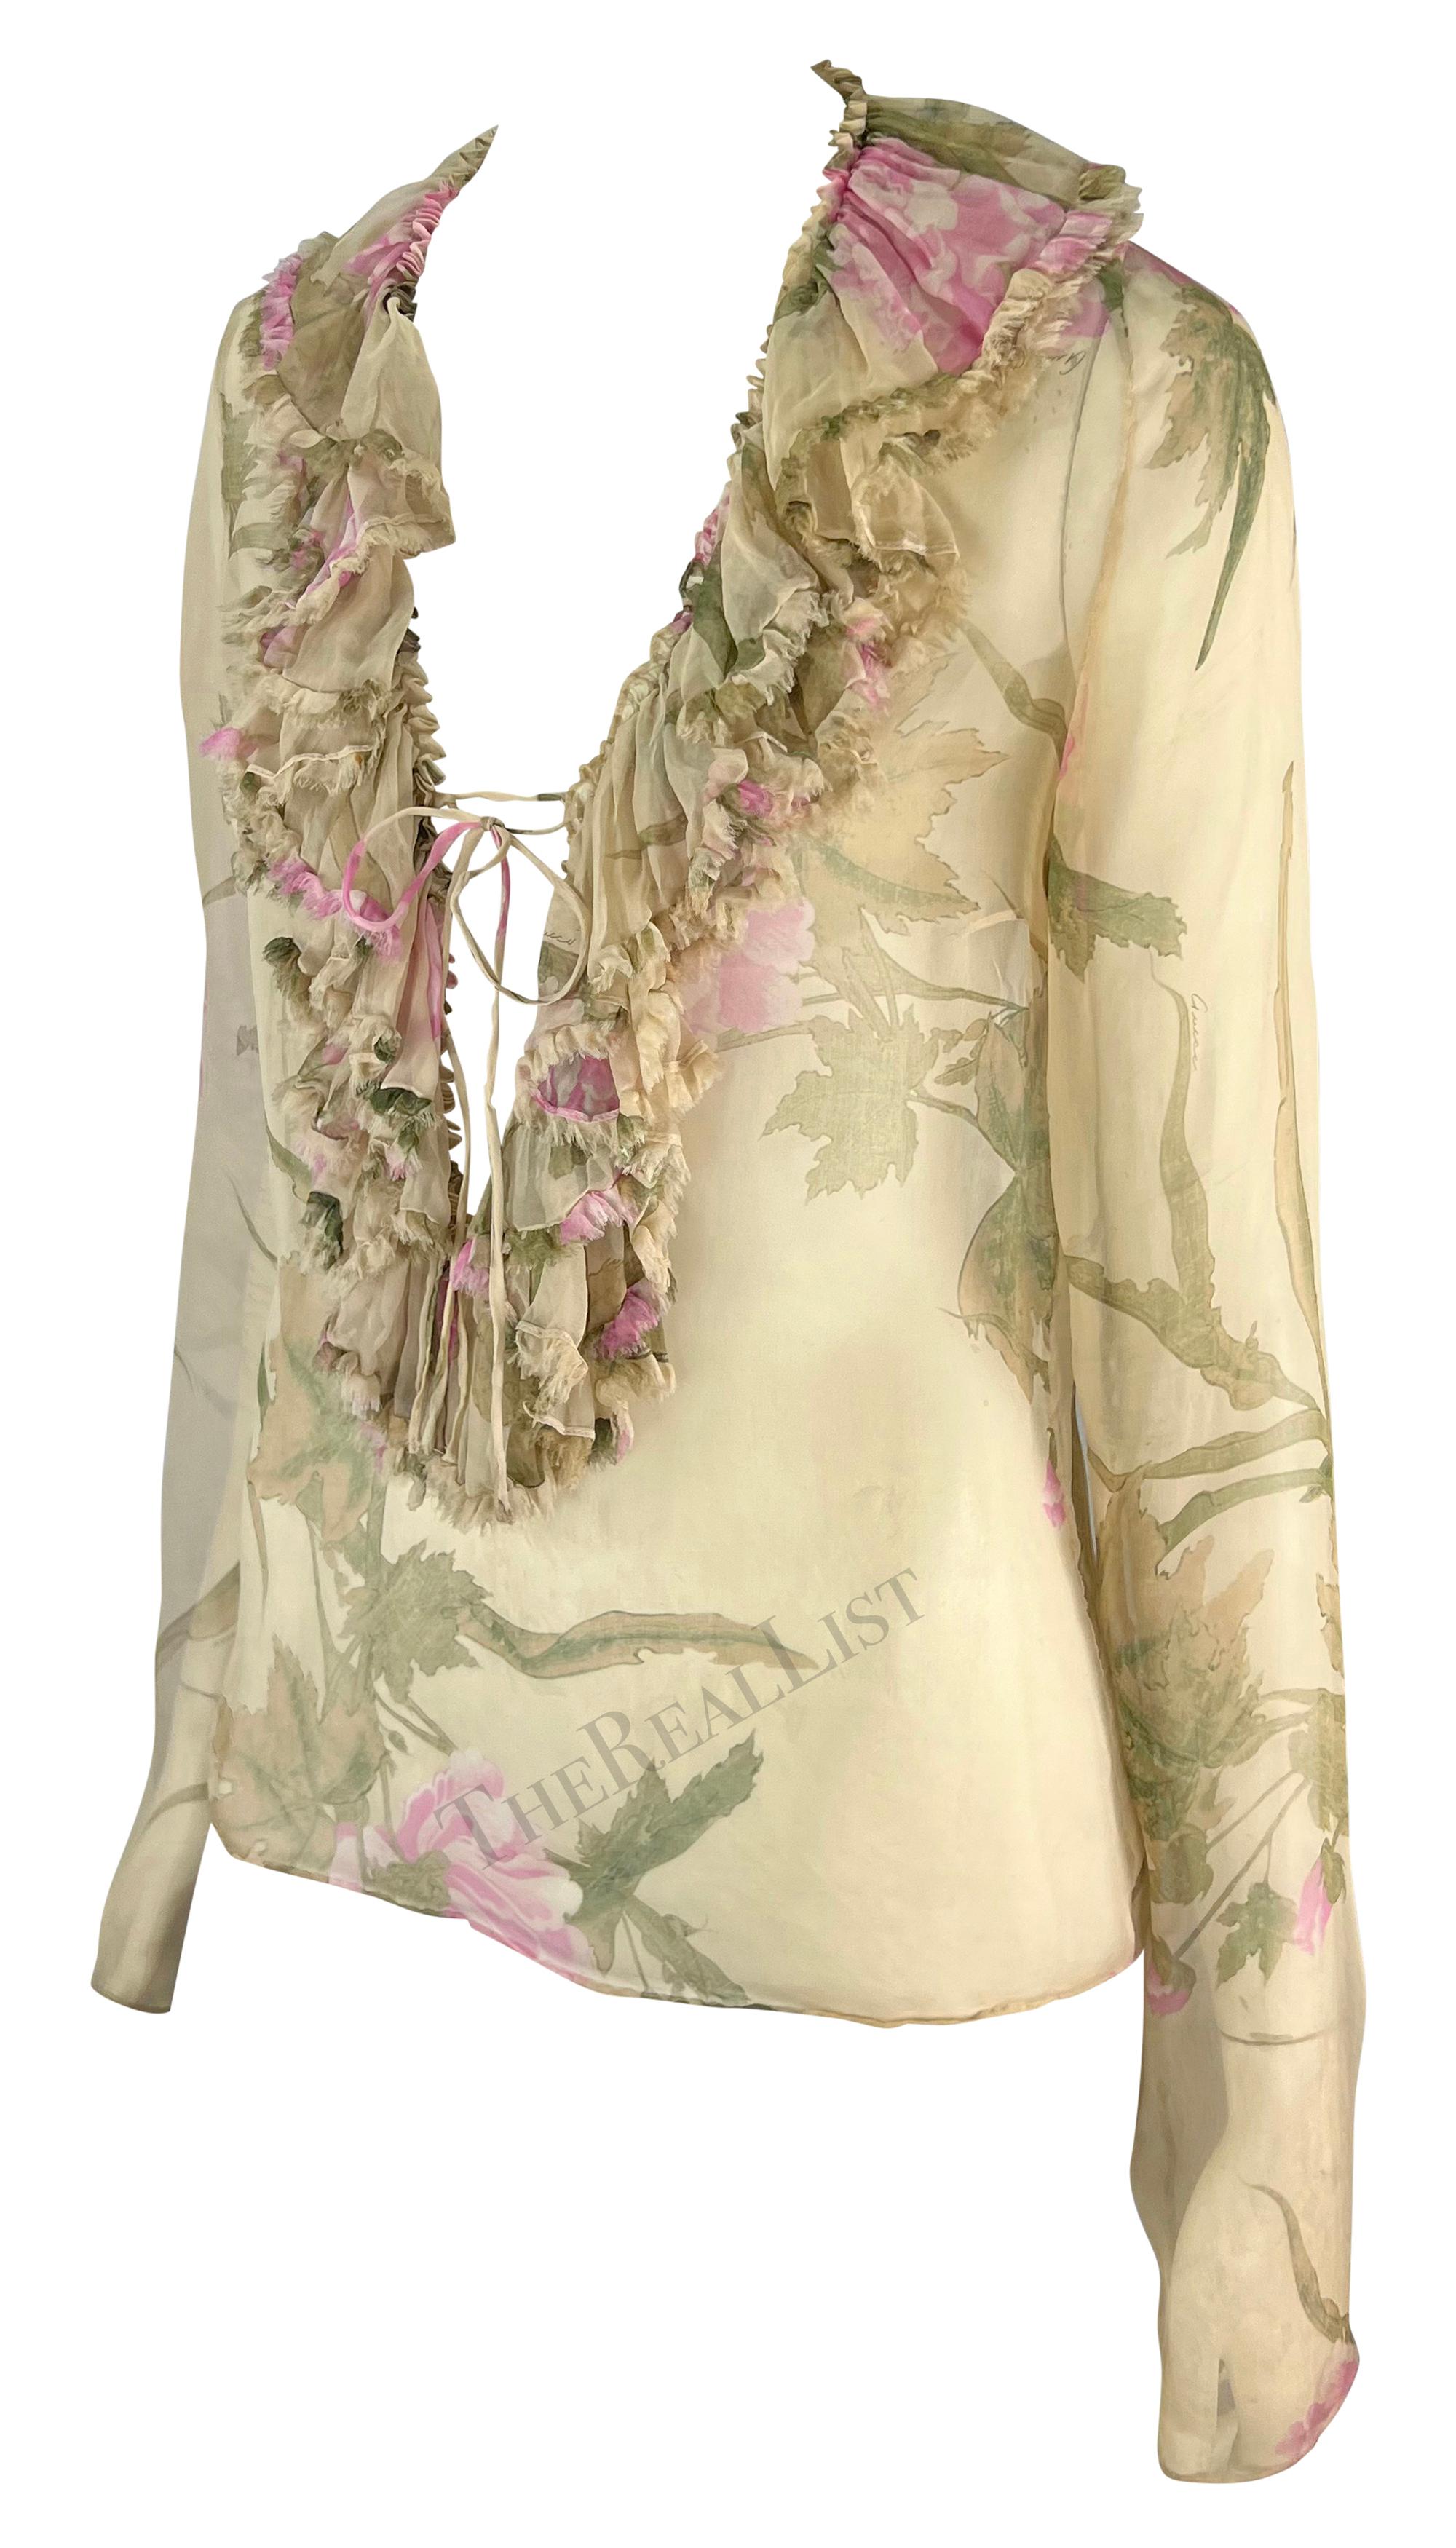 S/S 2003 Gucci by Tom Ford Tan Sheer Floral Ruffle Plunging Top In Excellent Condition For Sale In West Hollywood, CA